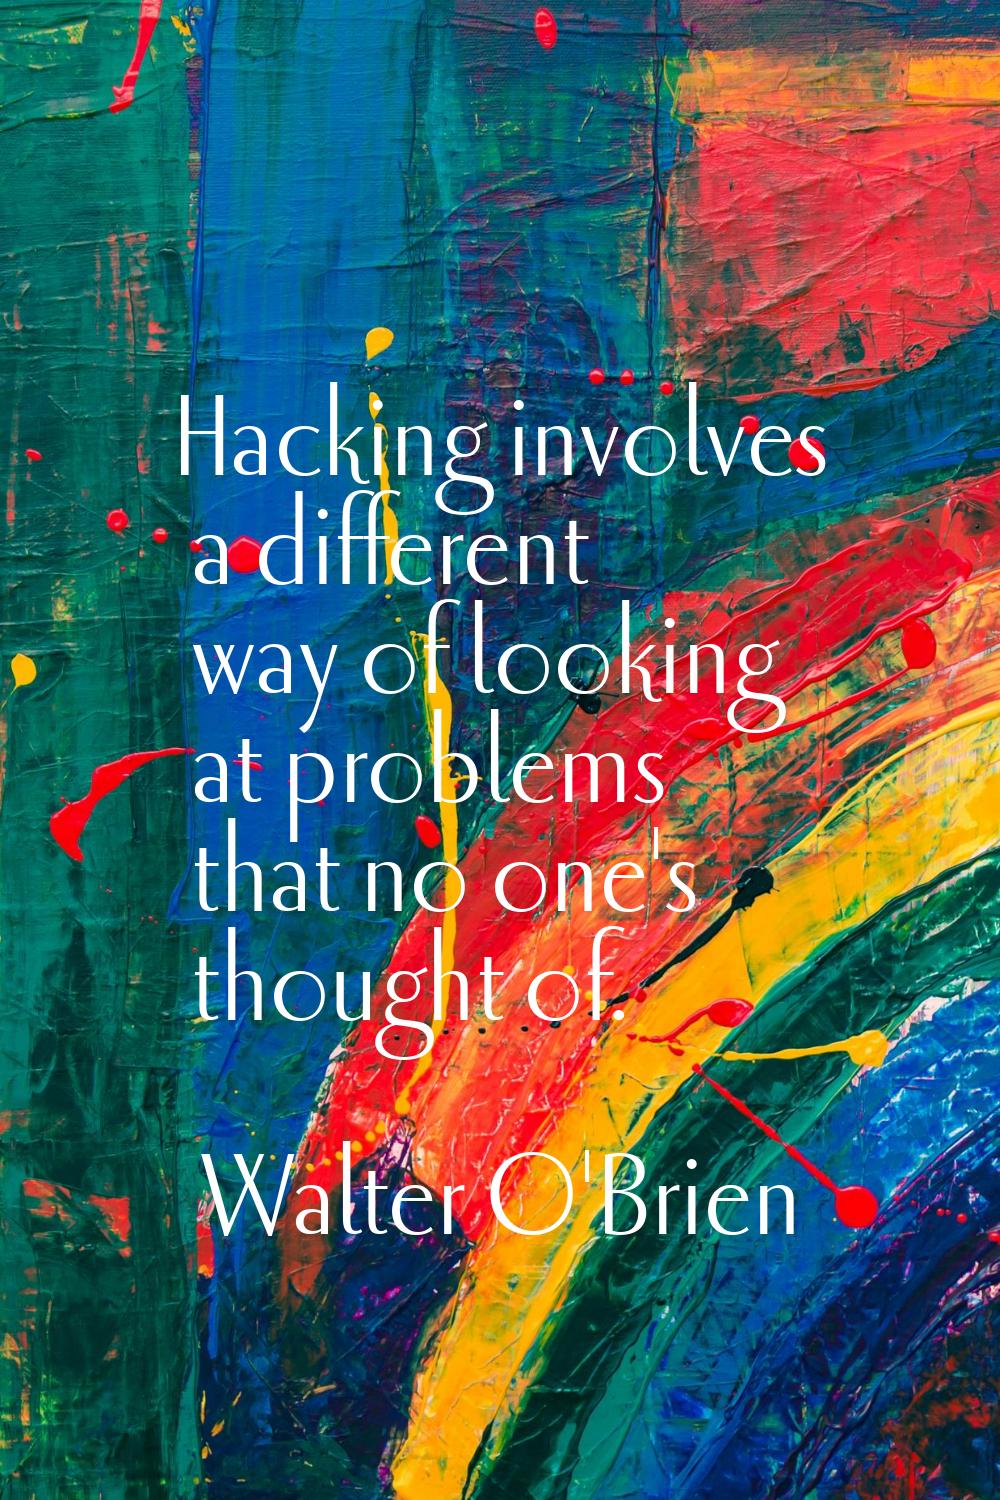 Hacking involves a different way of looking at problems that no one's thought of.